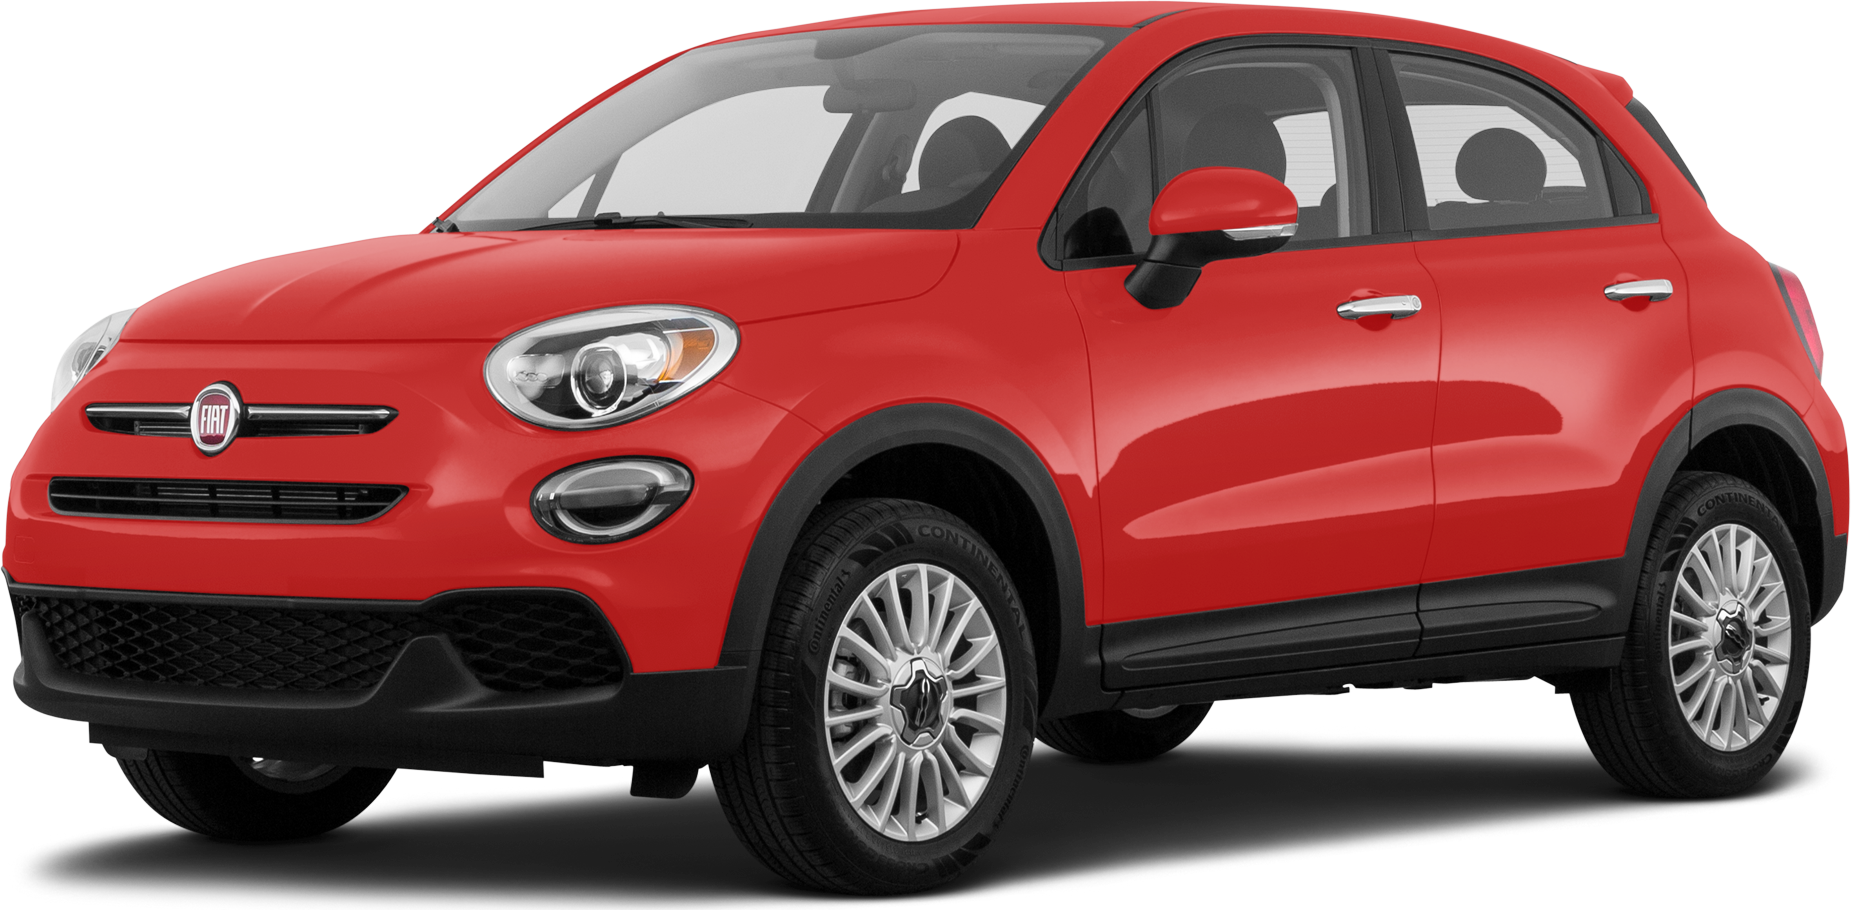 New Fiat 500X review: the crossover gets a facelift